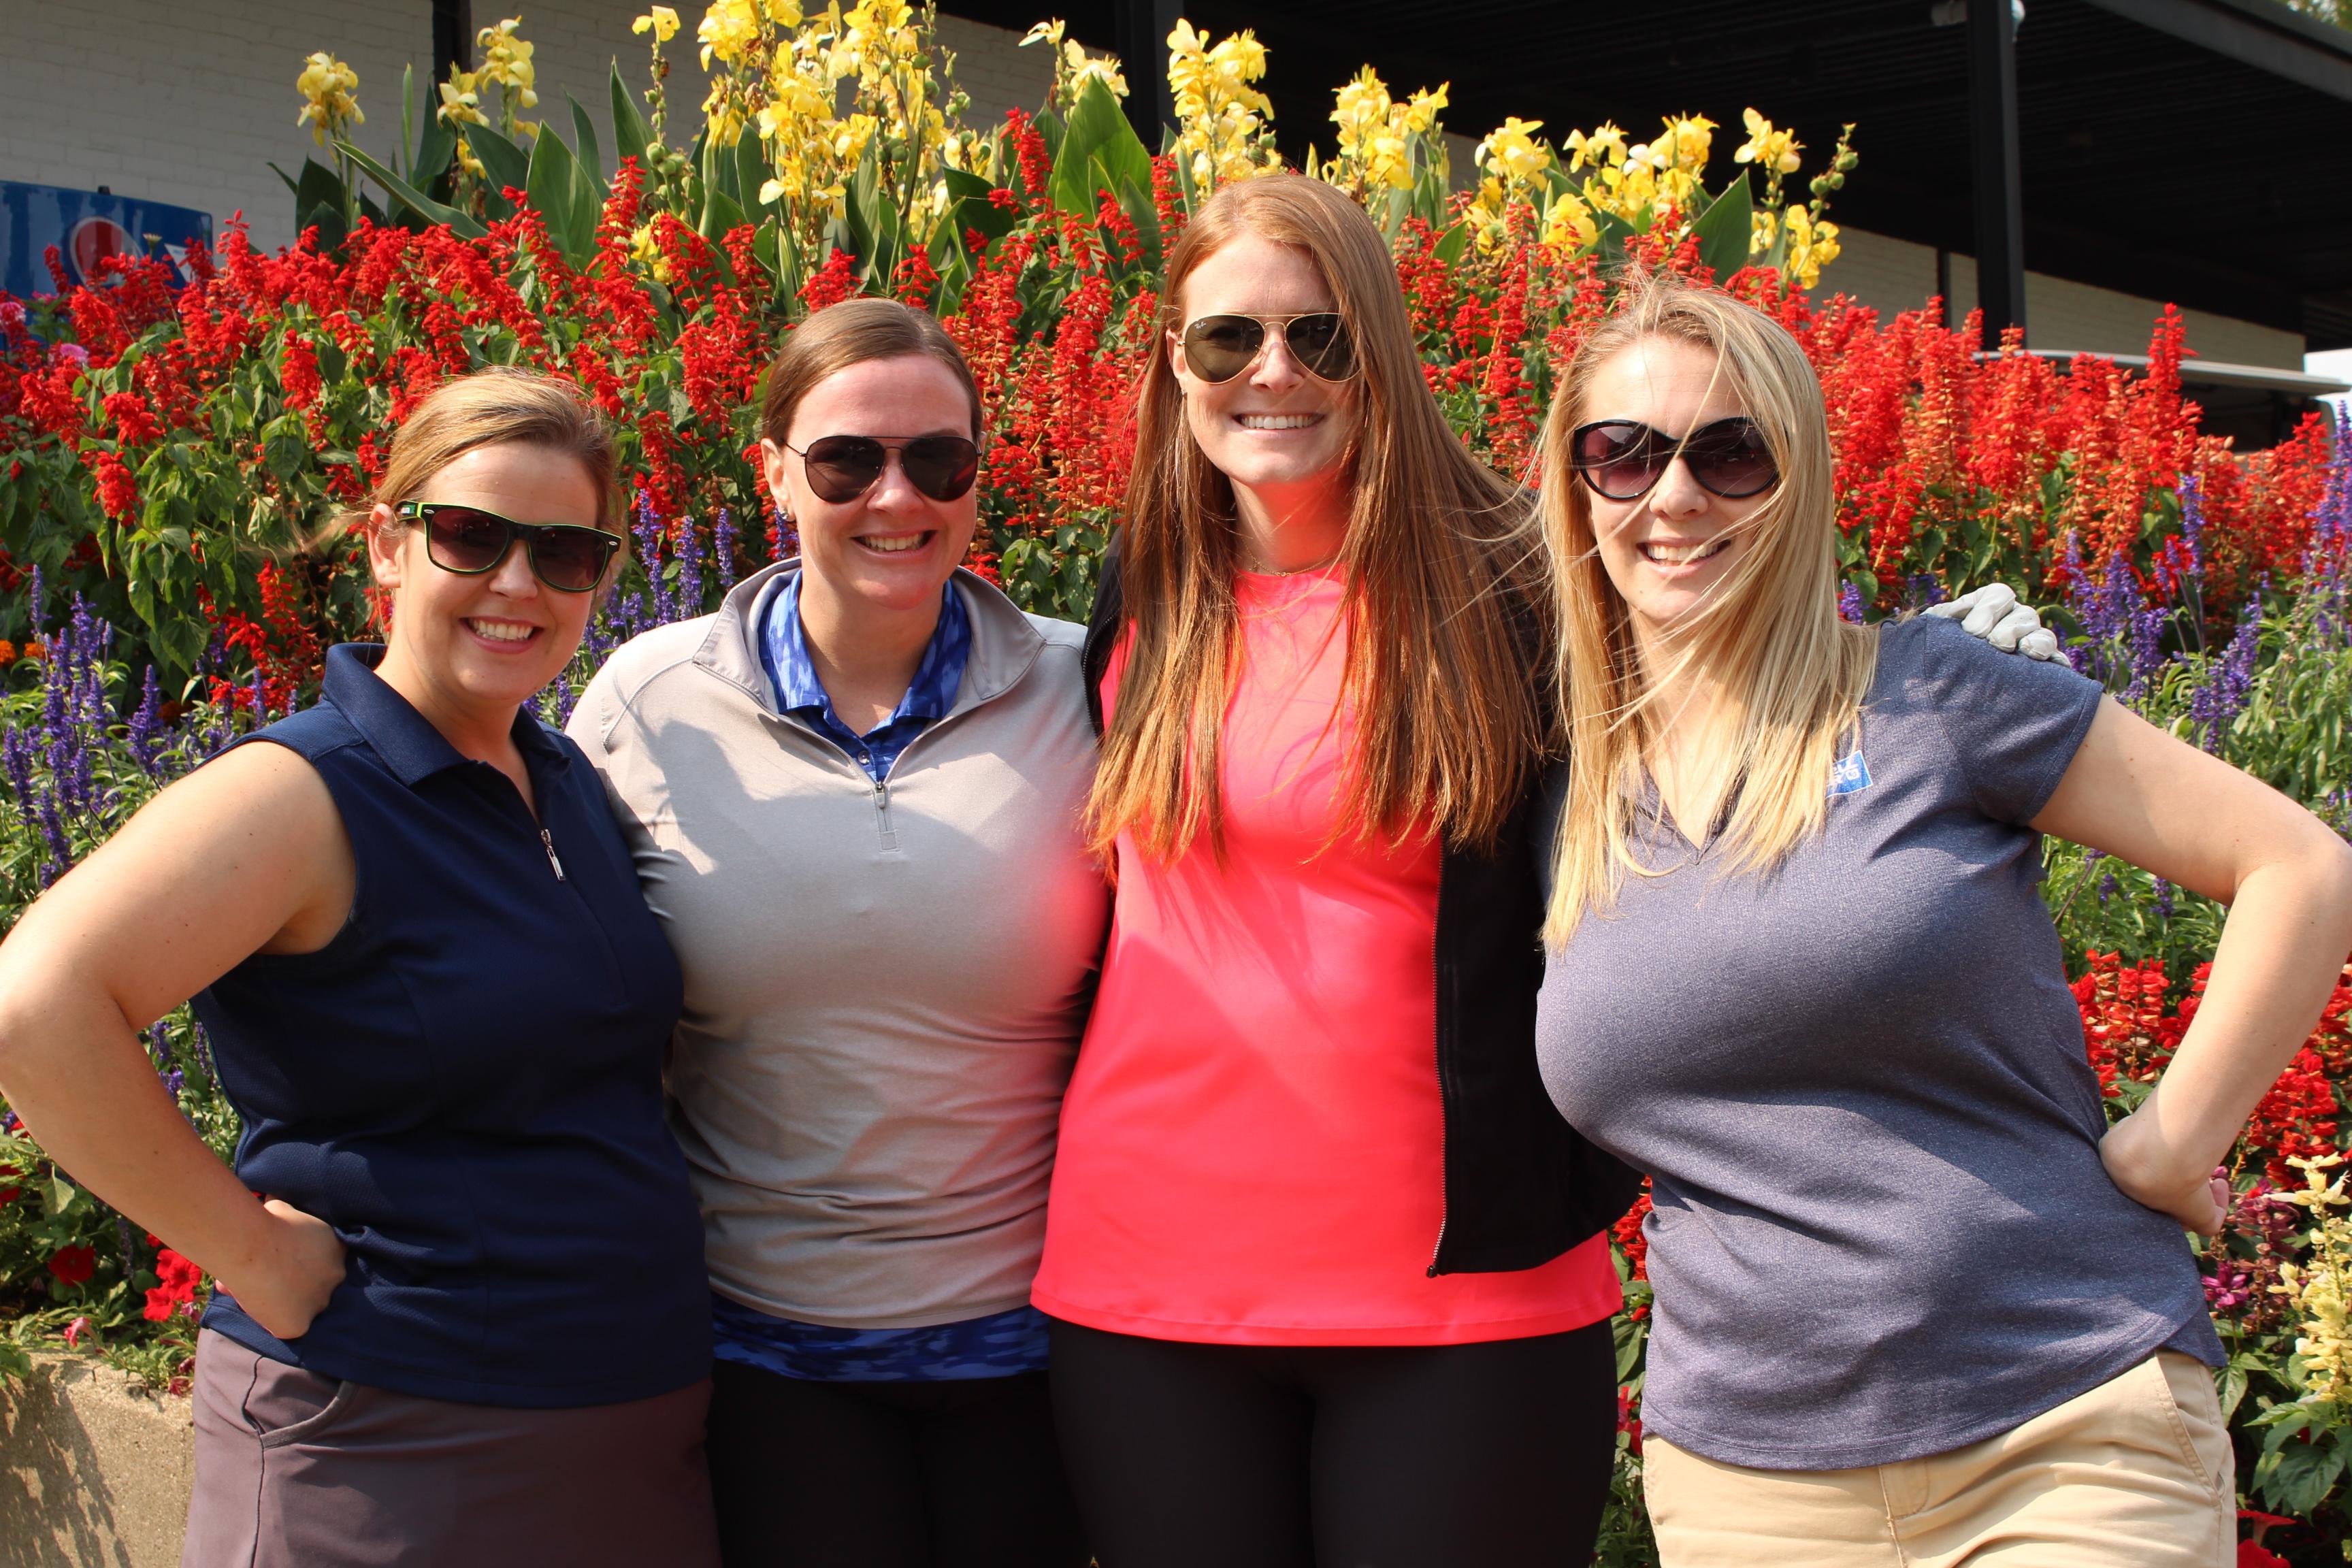 SLSF Women's Golf Outing 2019